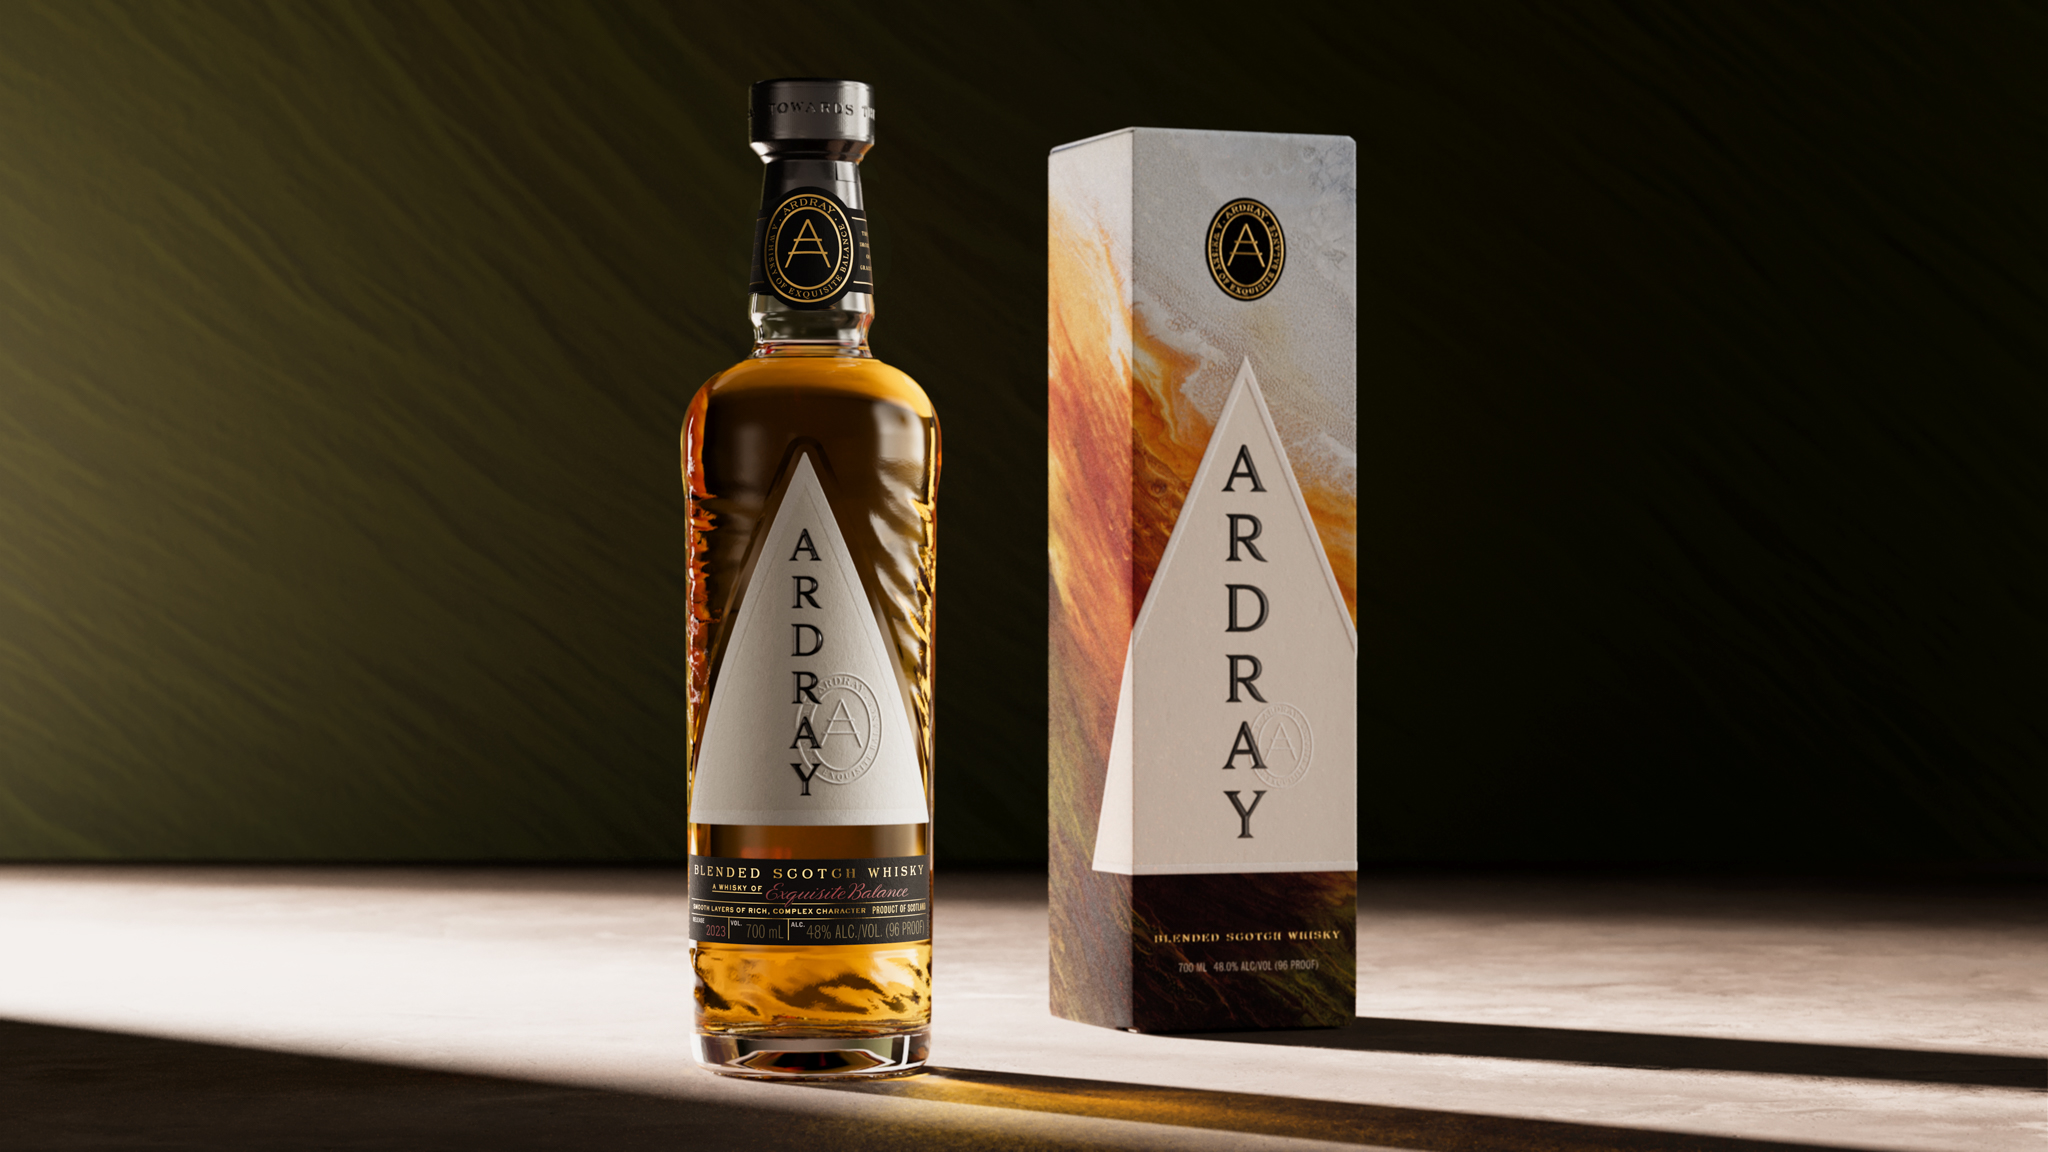 A New Whisky of Exquisite Balance, Ardray Invites You to Forget Everything You Know About Blended Scotch